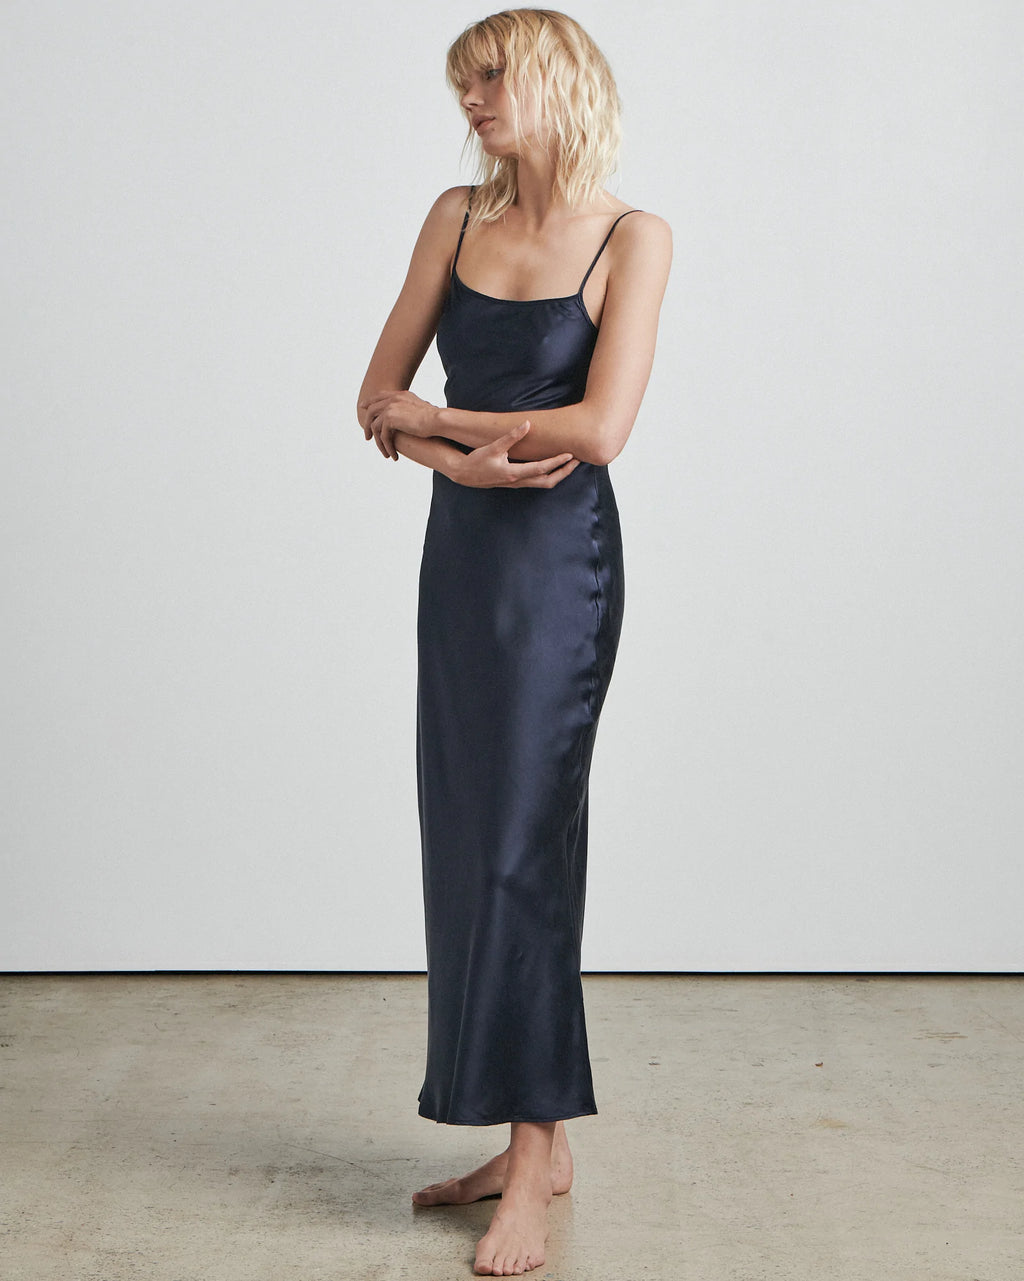 BARE - By Charlie Holiday - The Cami Slip Dress - Navy